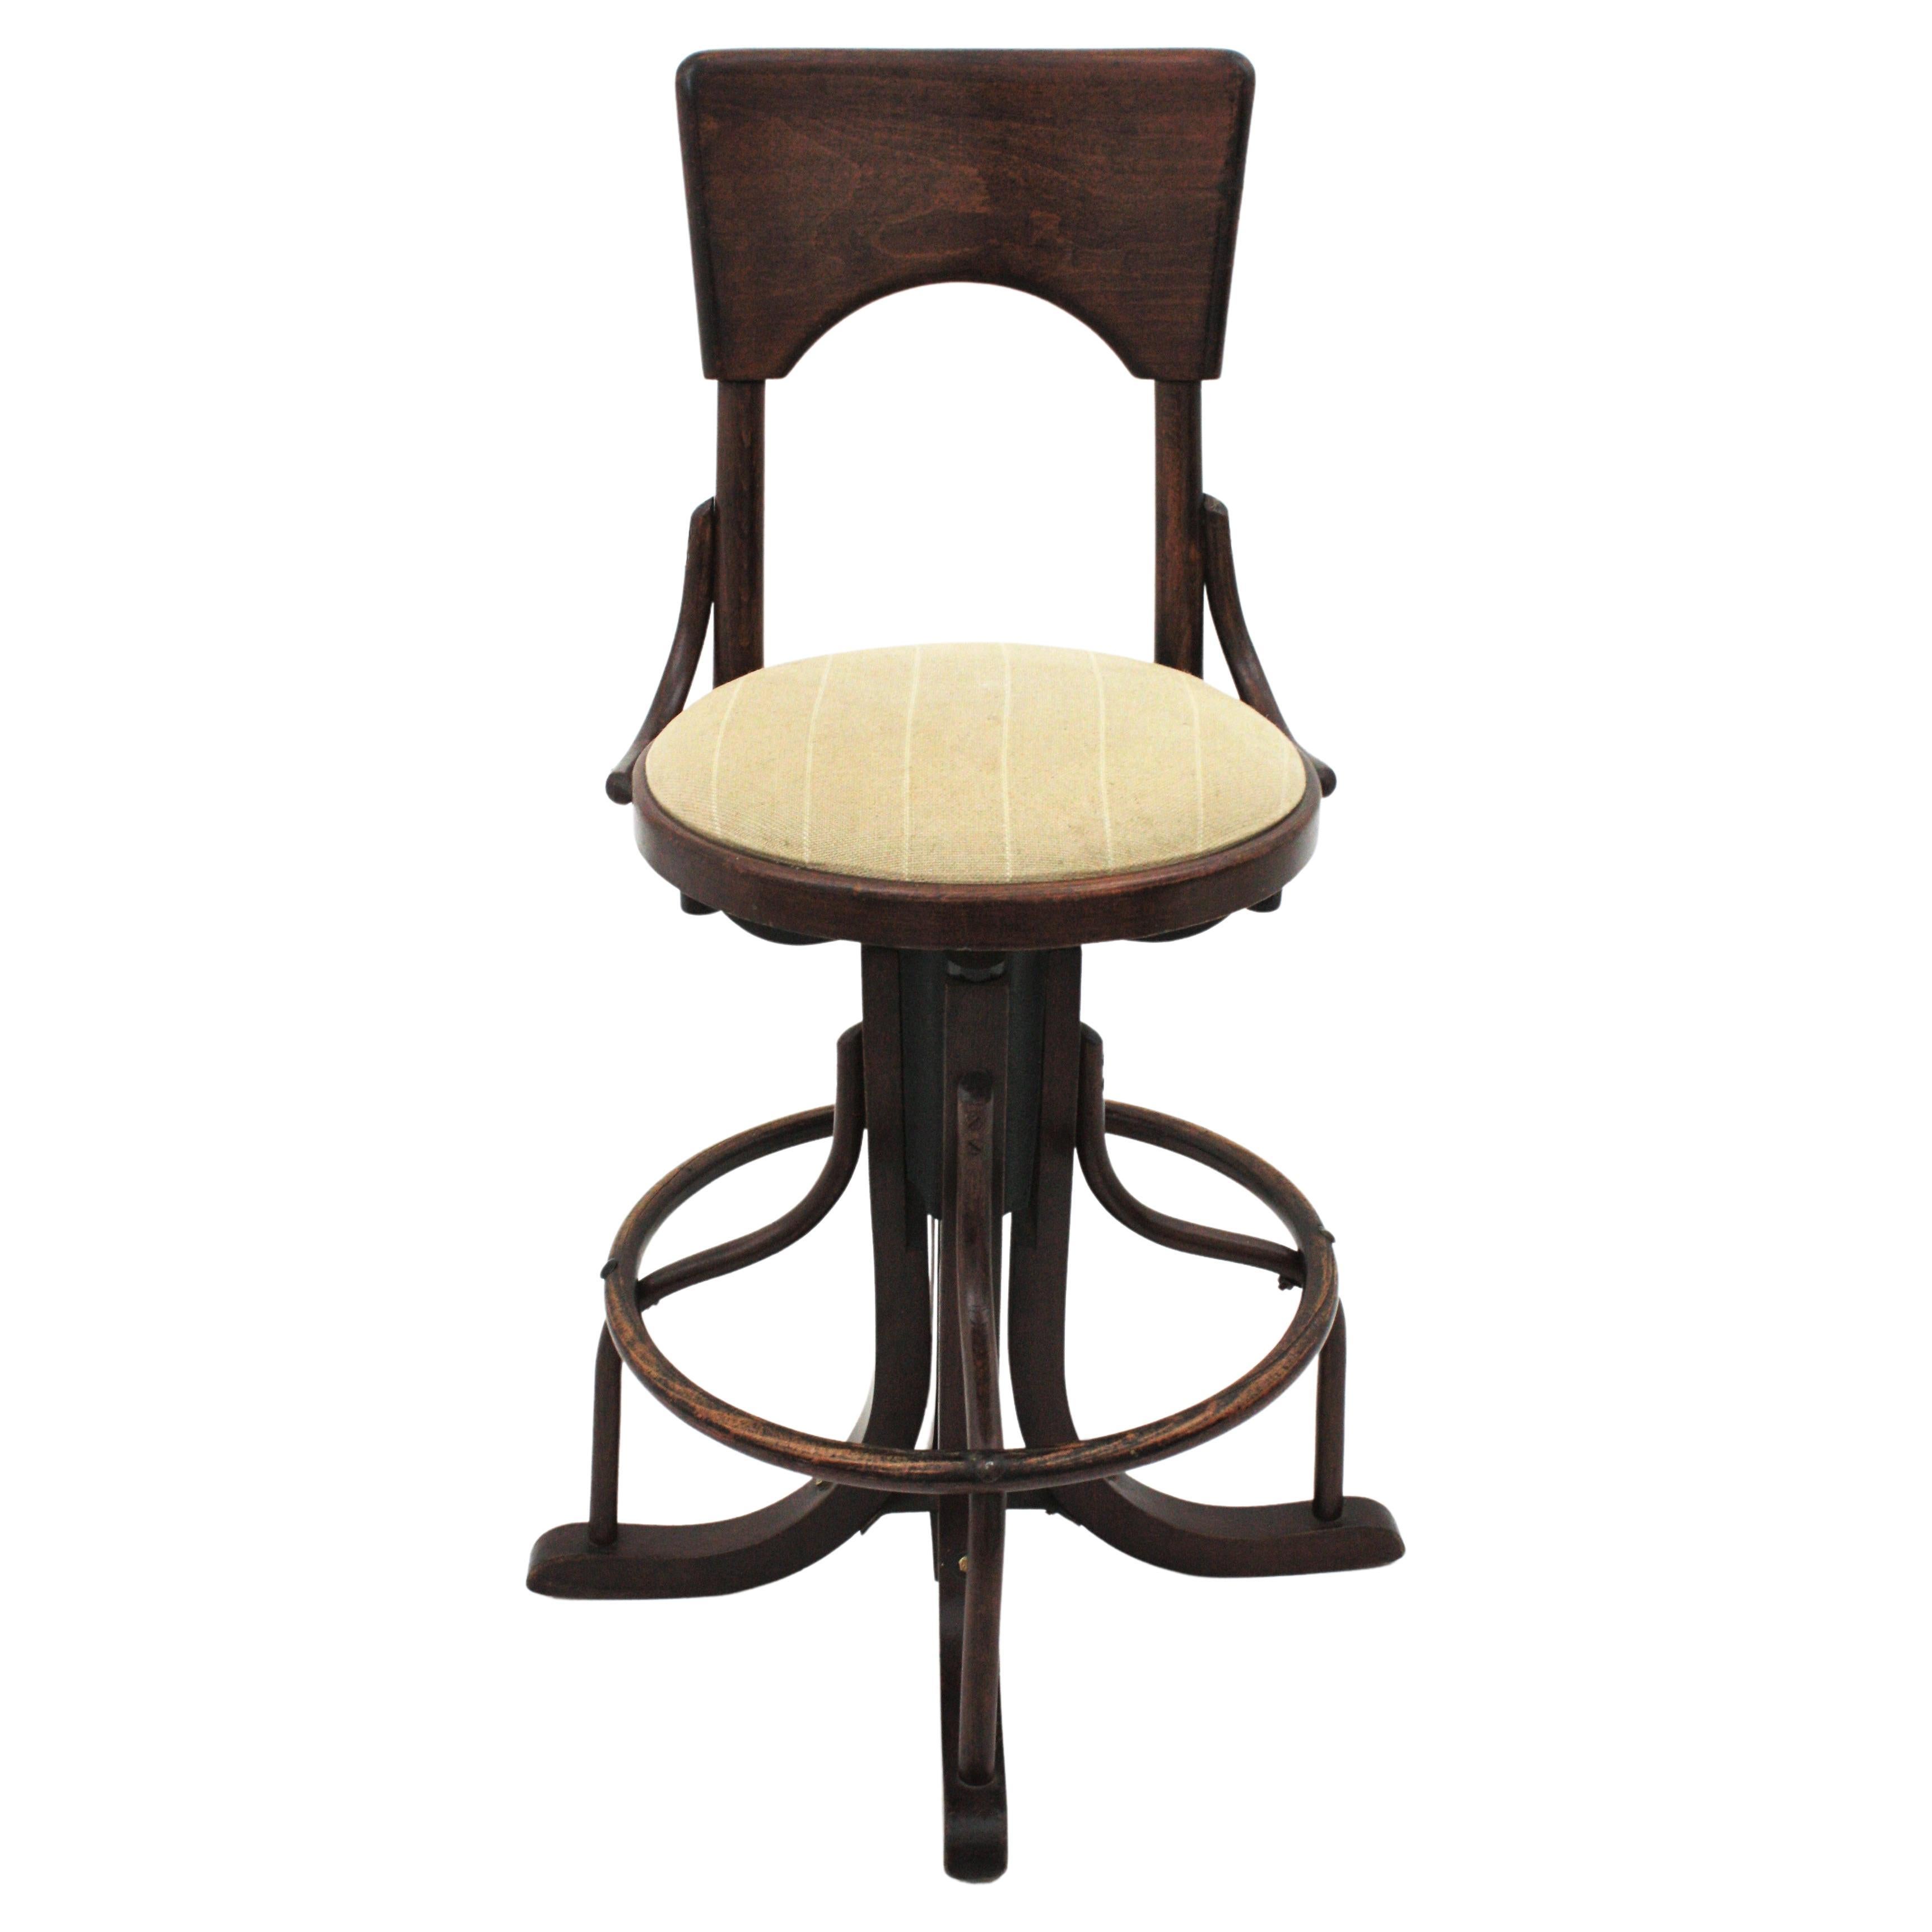 Swivel High Stool in Bentwood